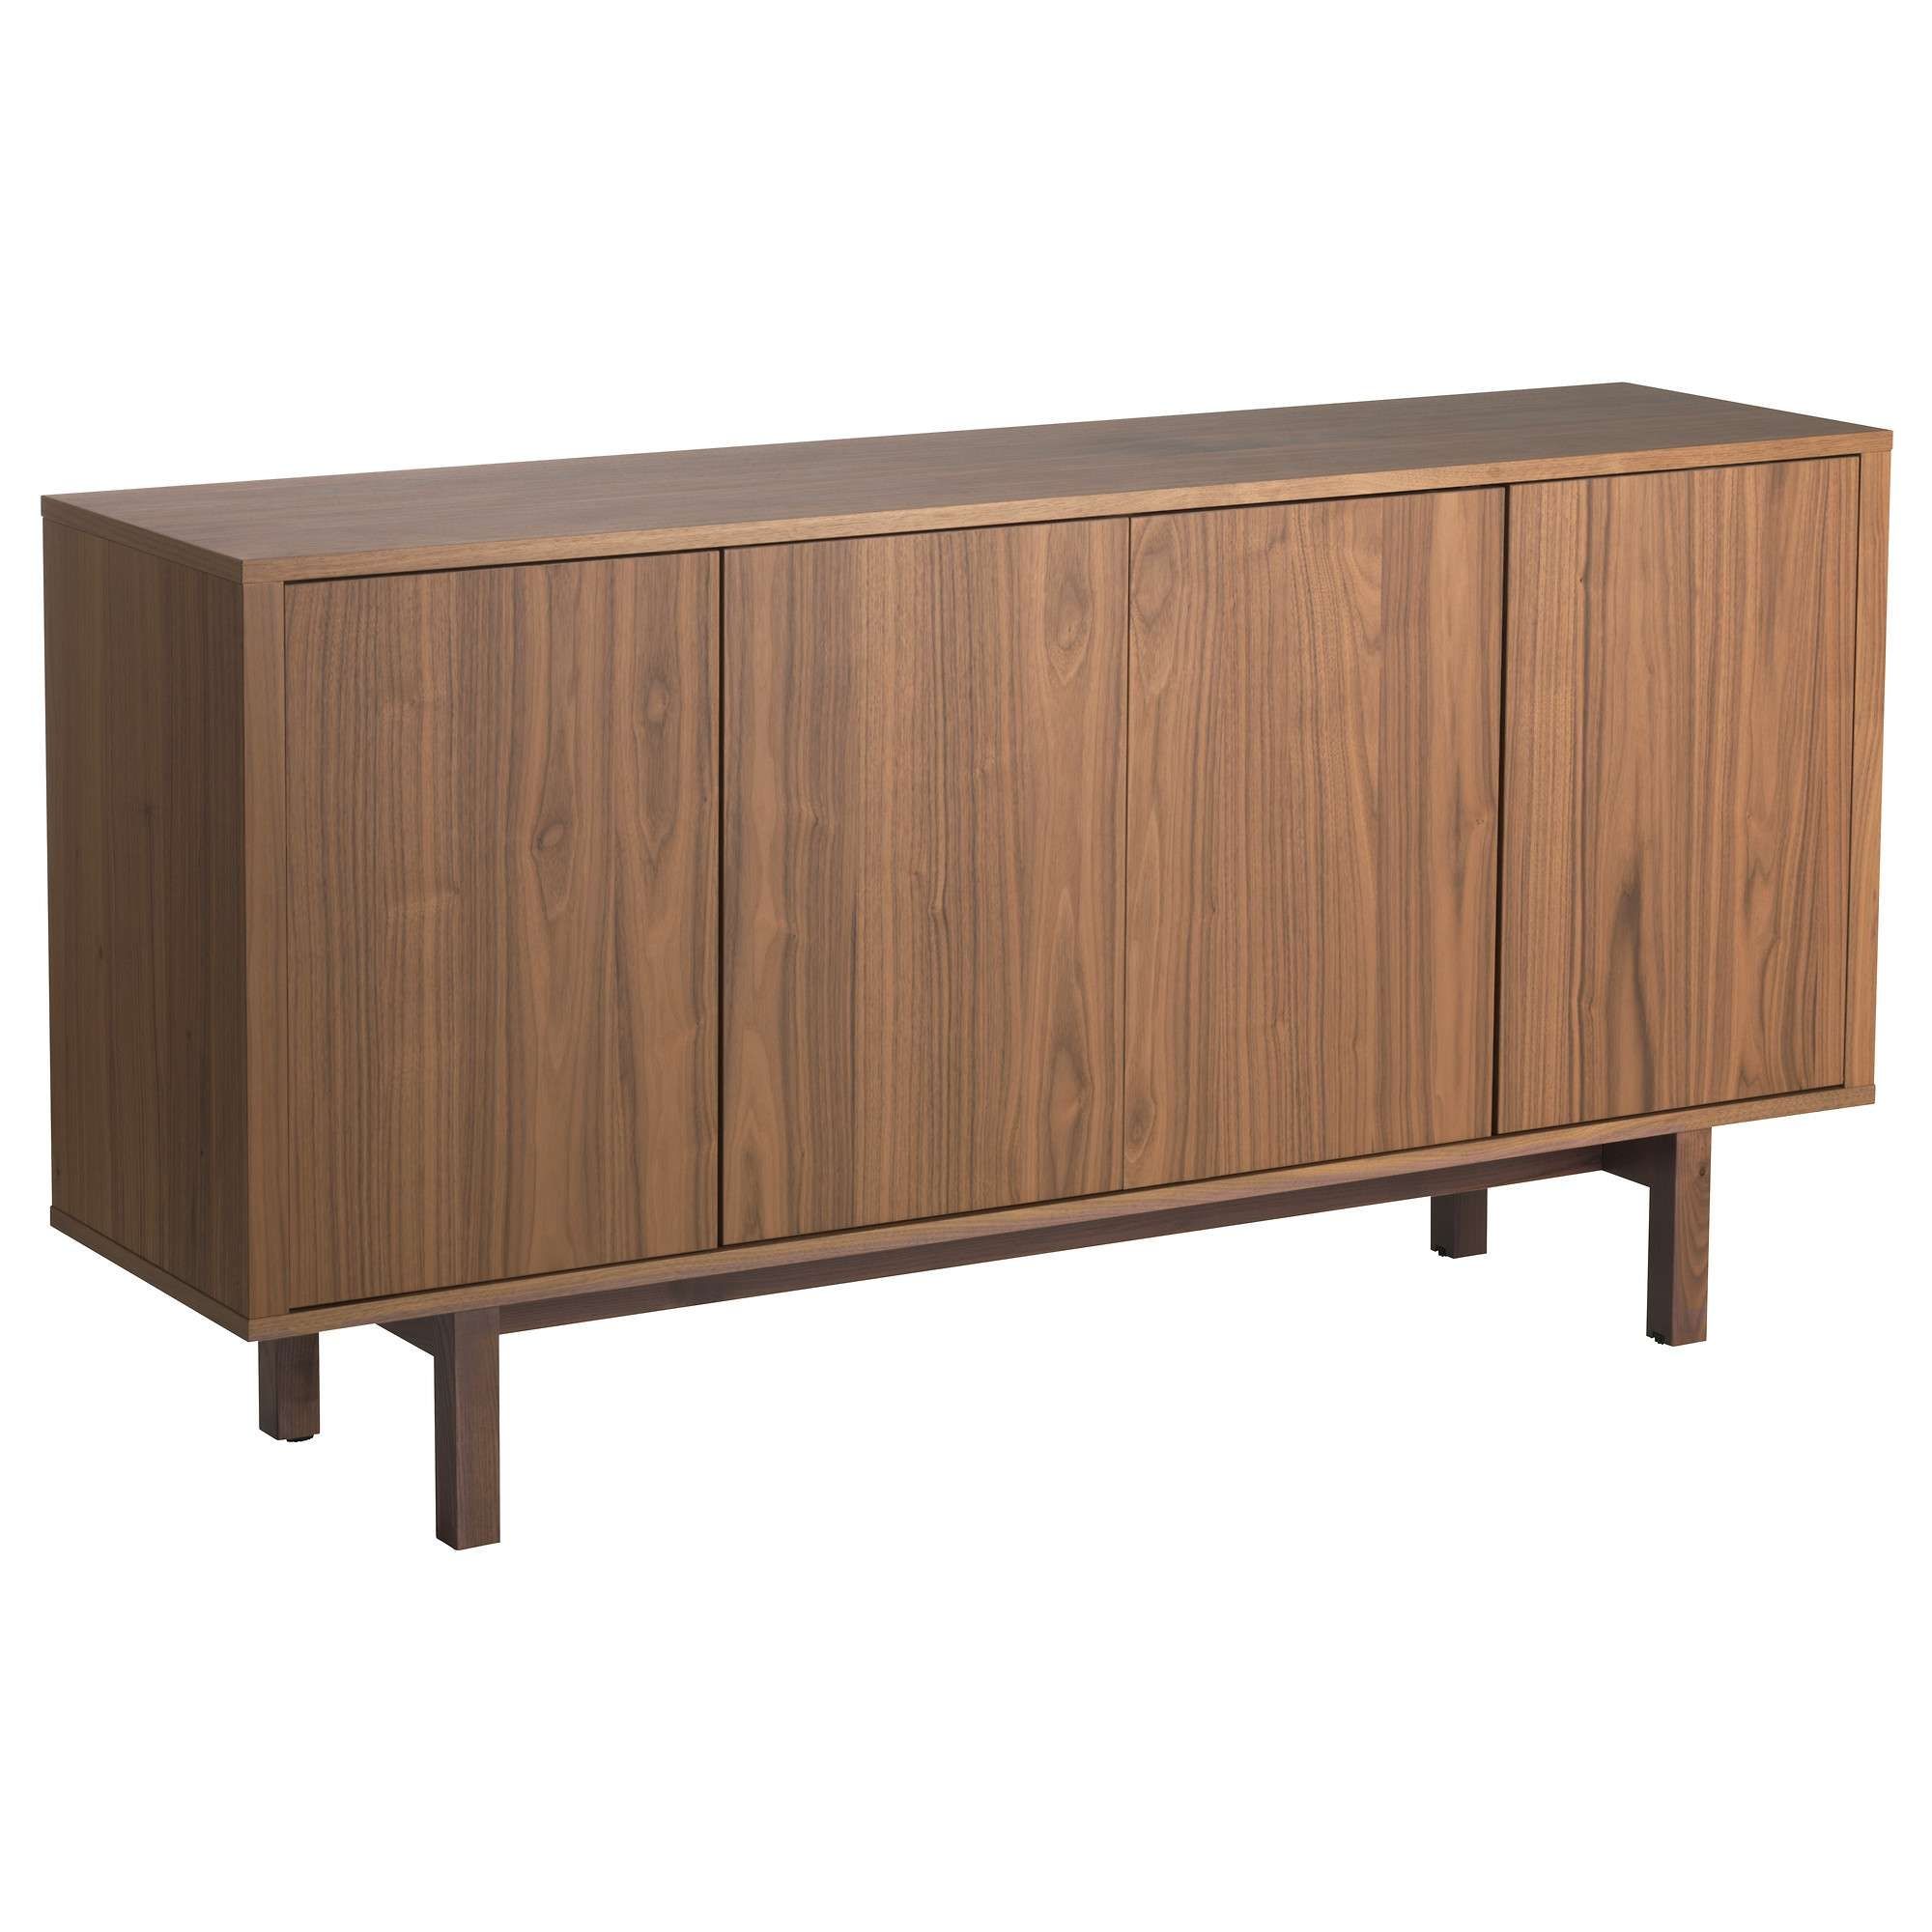 Buffet Tables & Sideboards – Ikea Pertaining To Ikea Bjursta Sideboards (View 6 of 20)